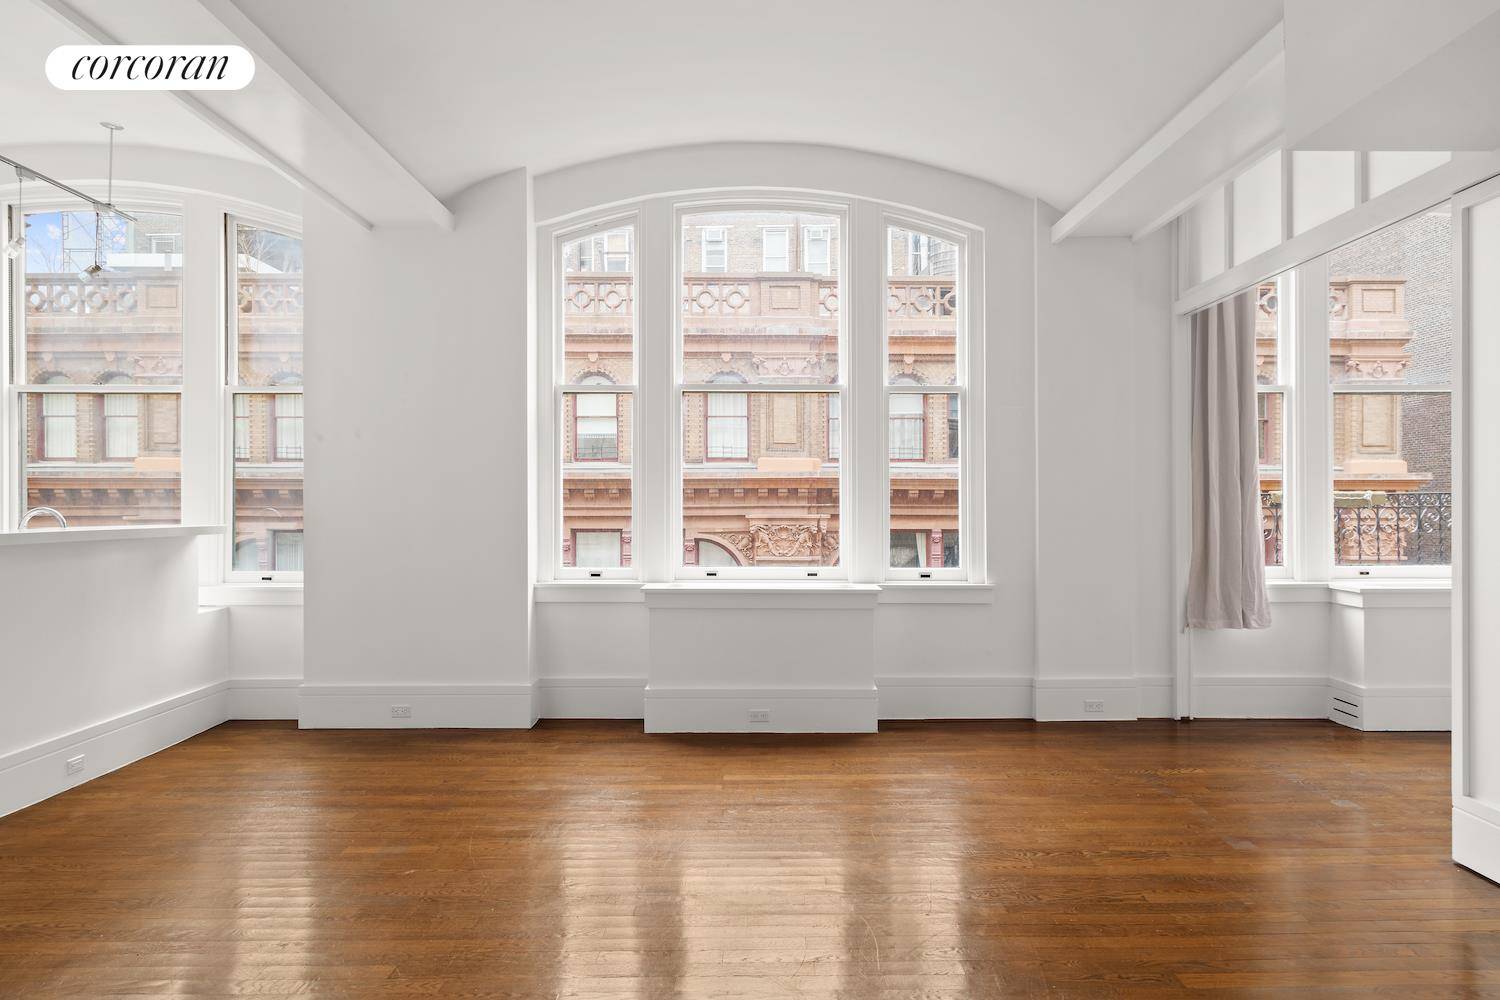 This bright, one bedroom loft residence offers barrel vaulted 12' ceilings and nine oversized, arched windows with incredible natural light and Northern exposure.